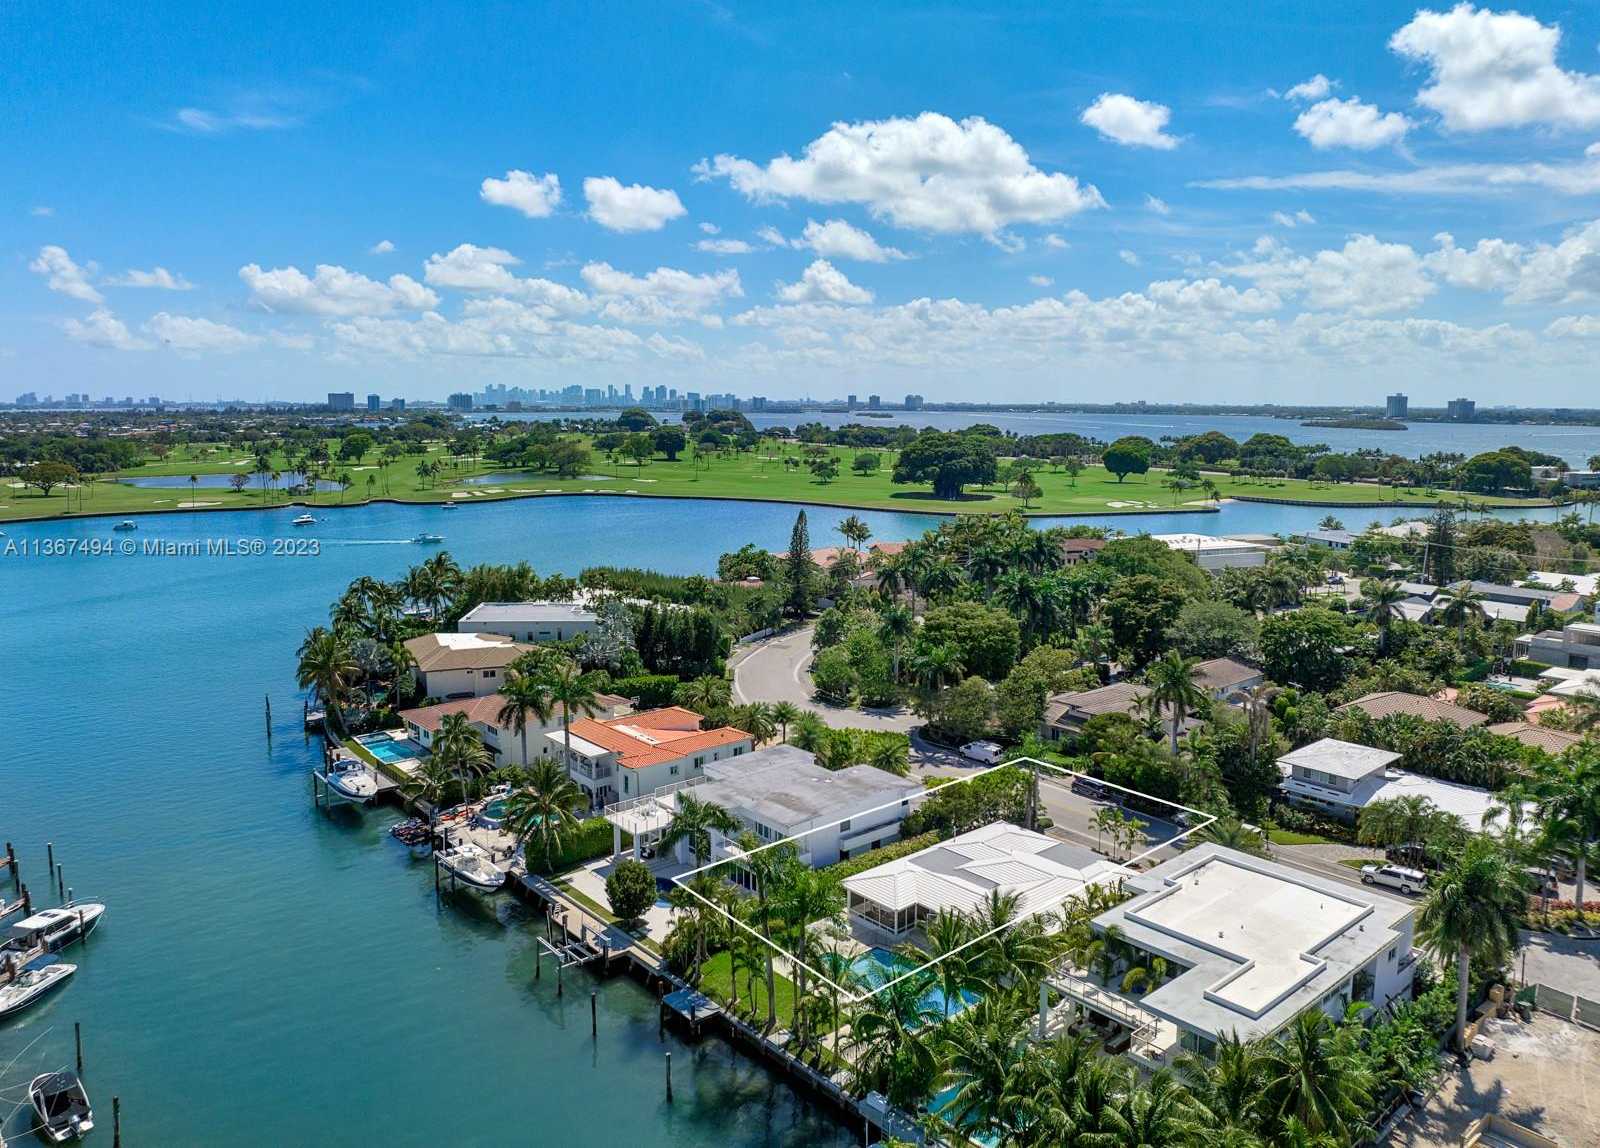 View Bay Harbor Islands, FL 33154 house